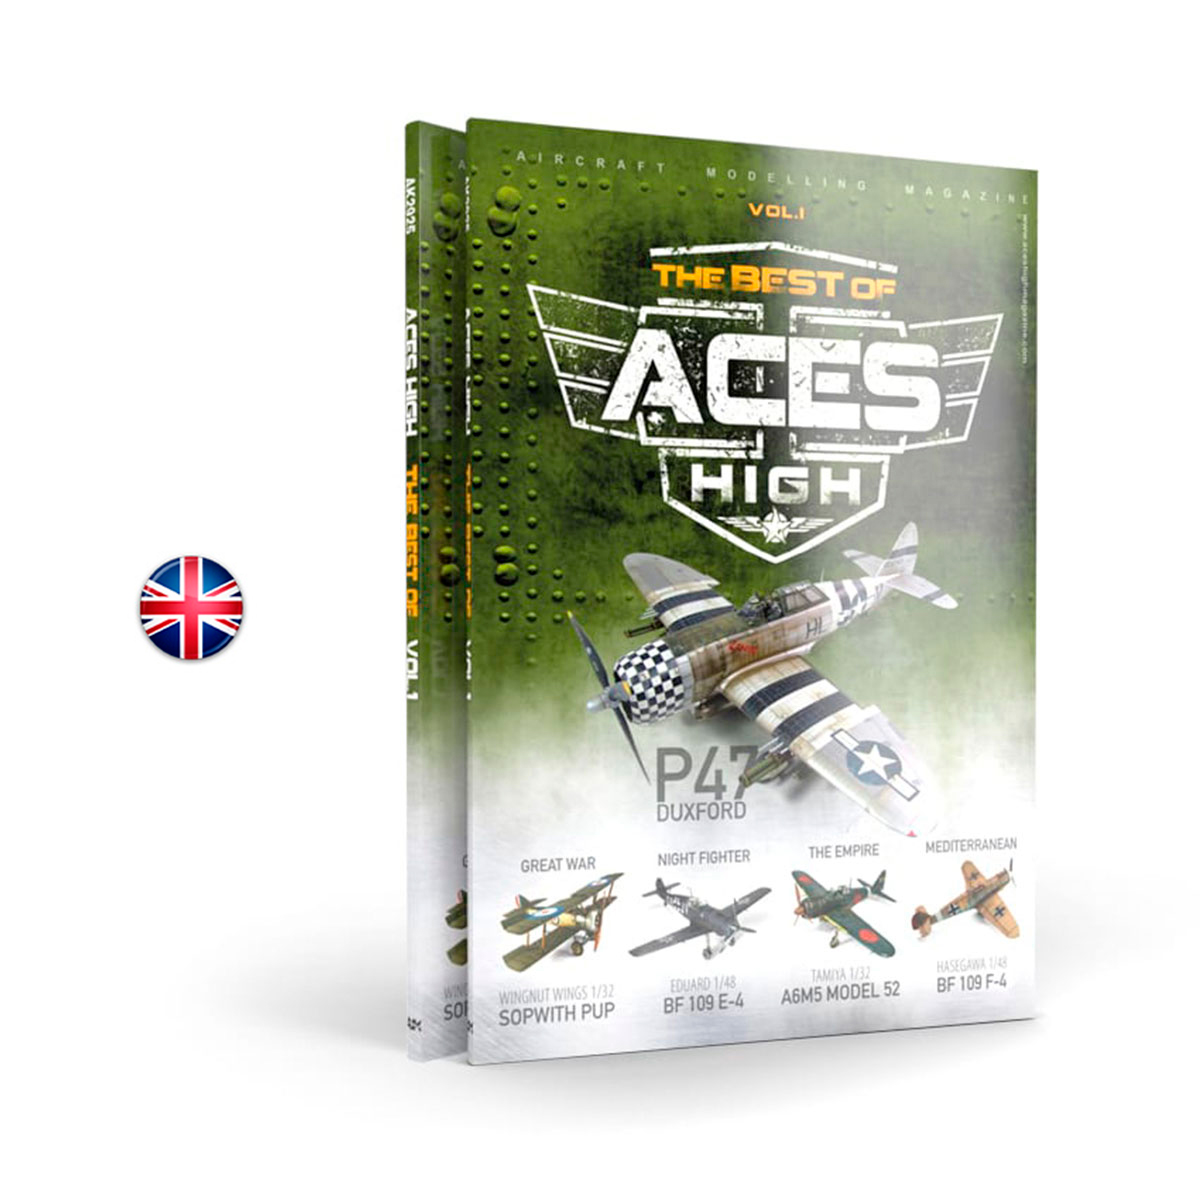 The best of: ACES HIGH MAGAZINE – VOL1